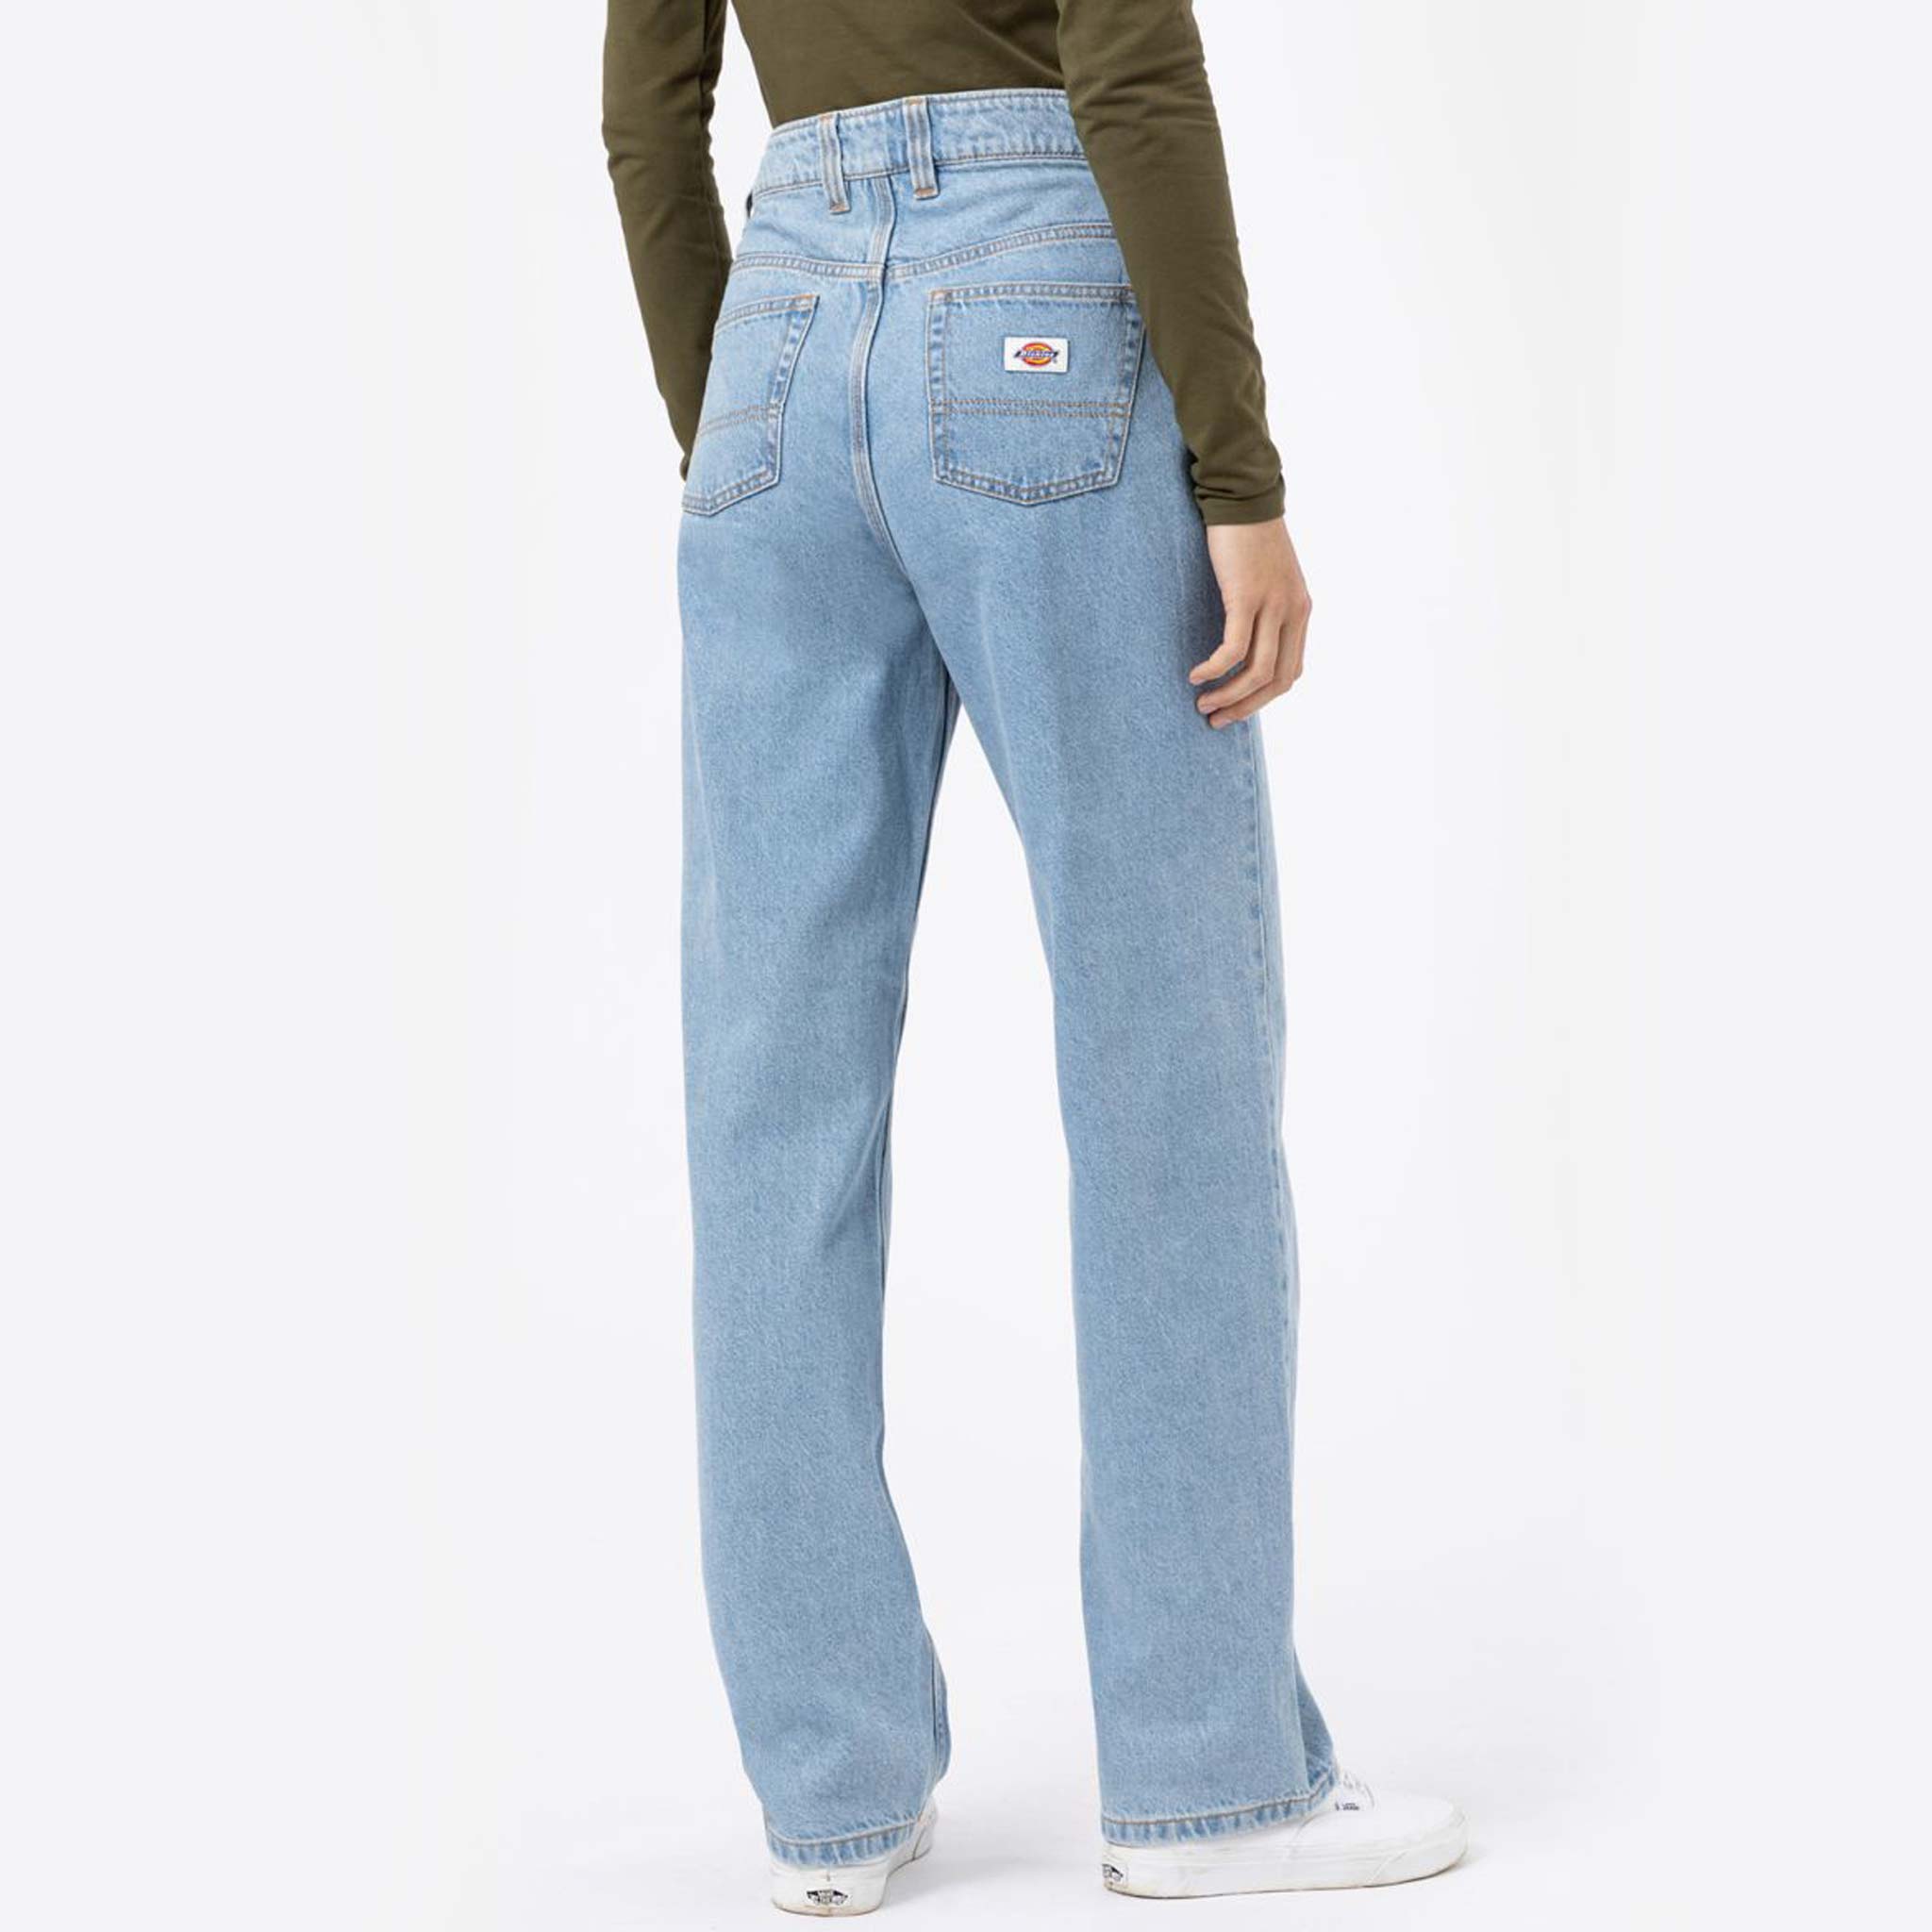 Women's Thomasville Relaxed Fit Jeans